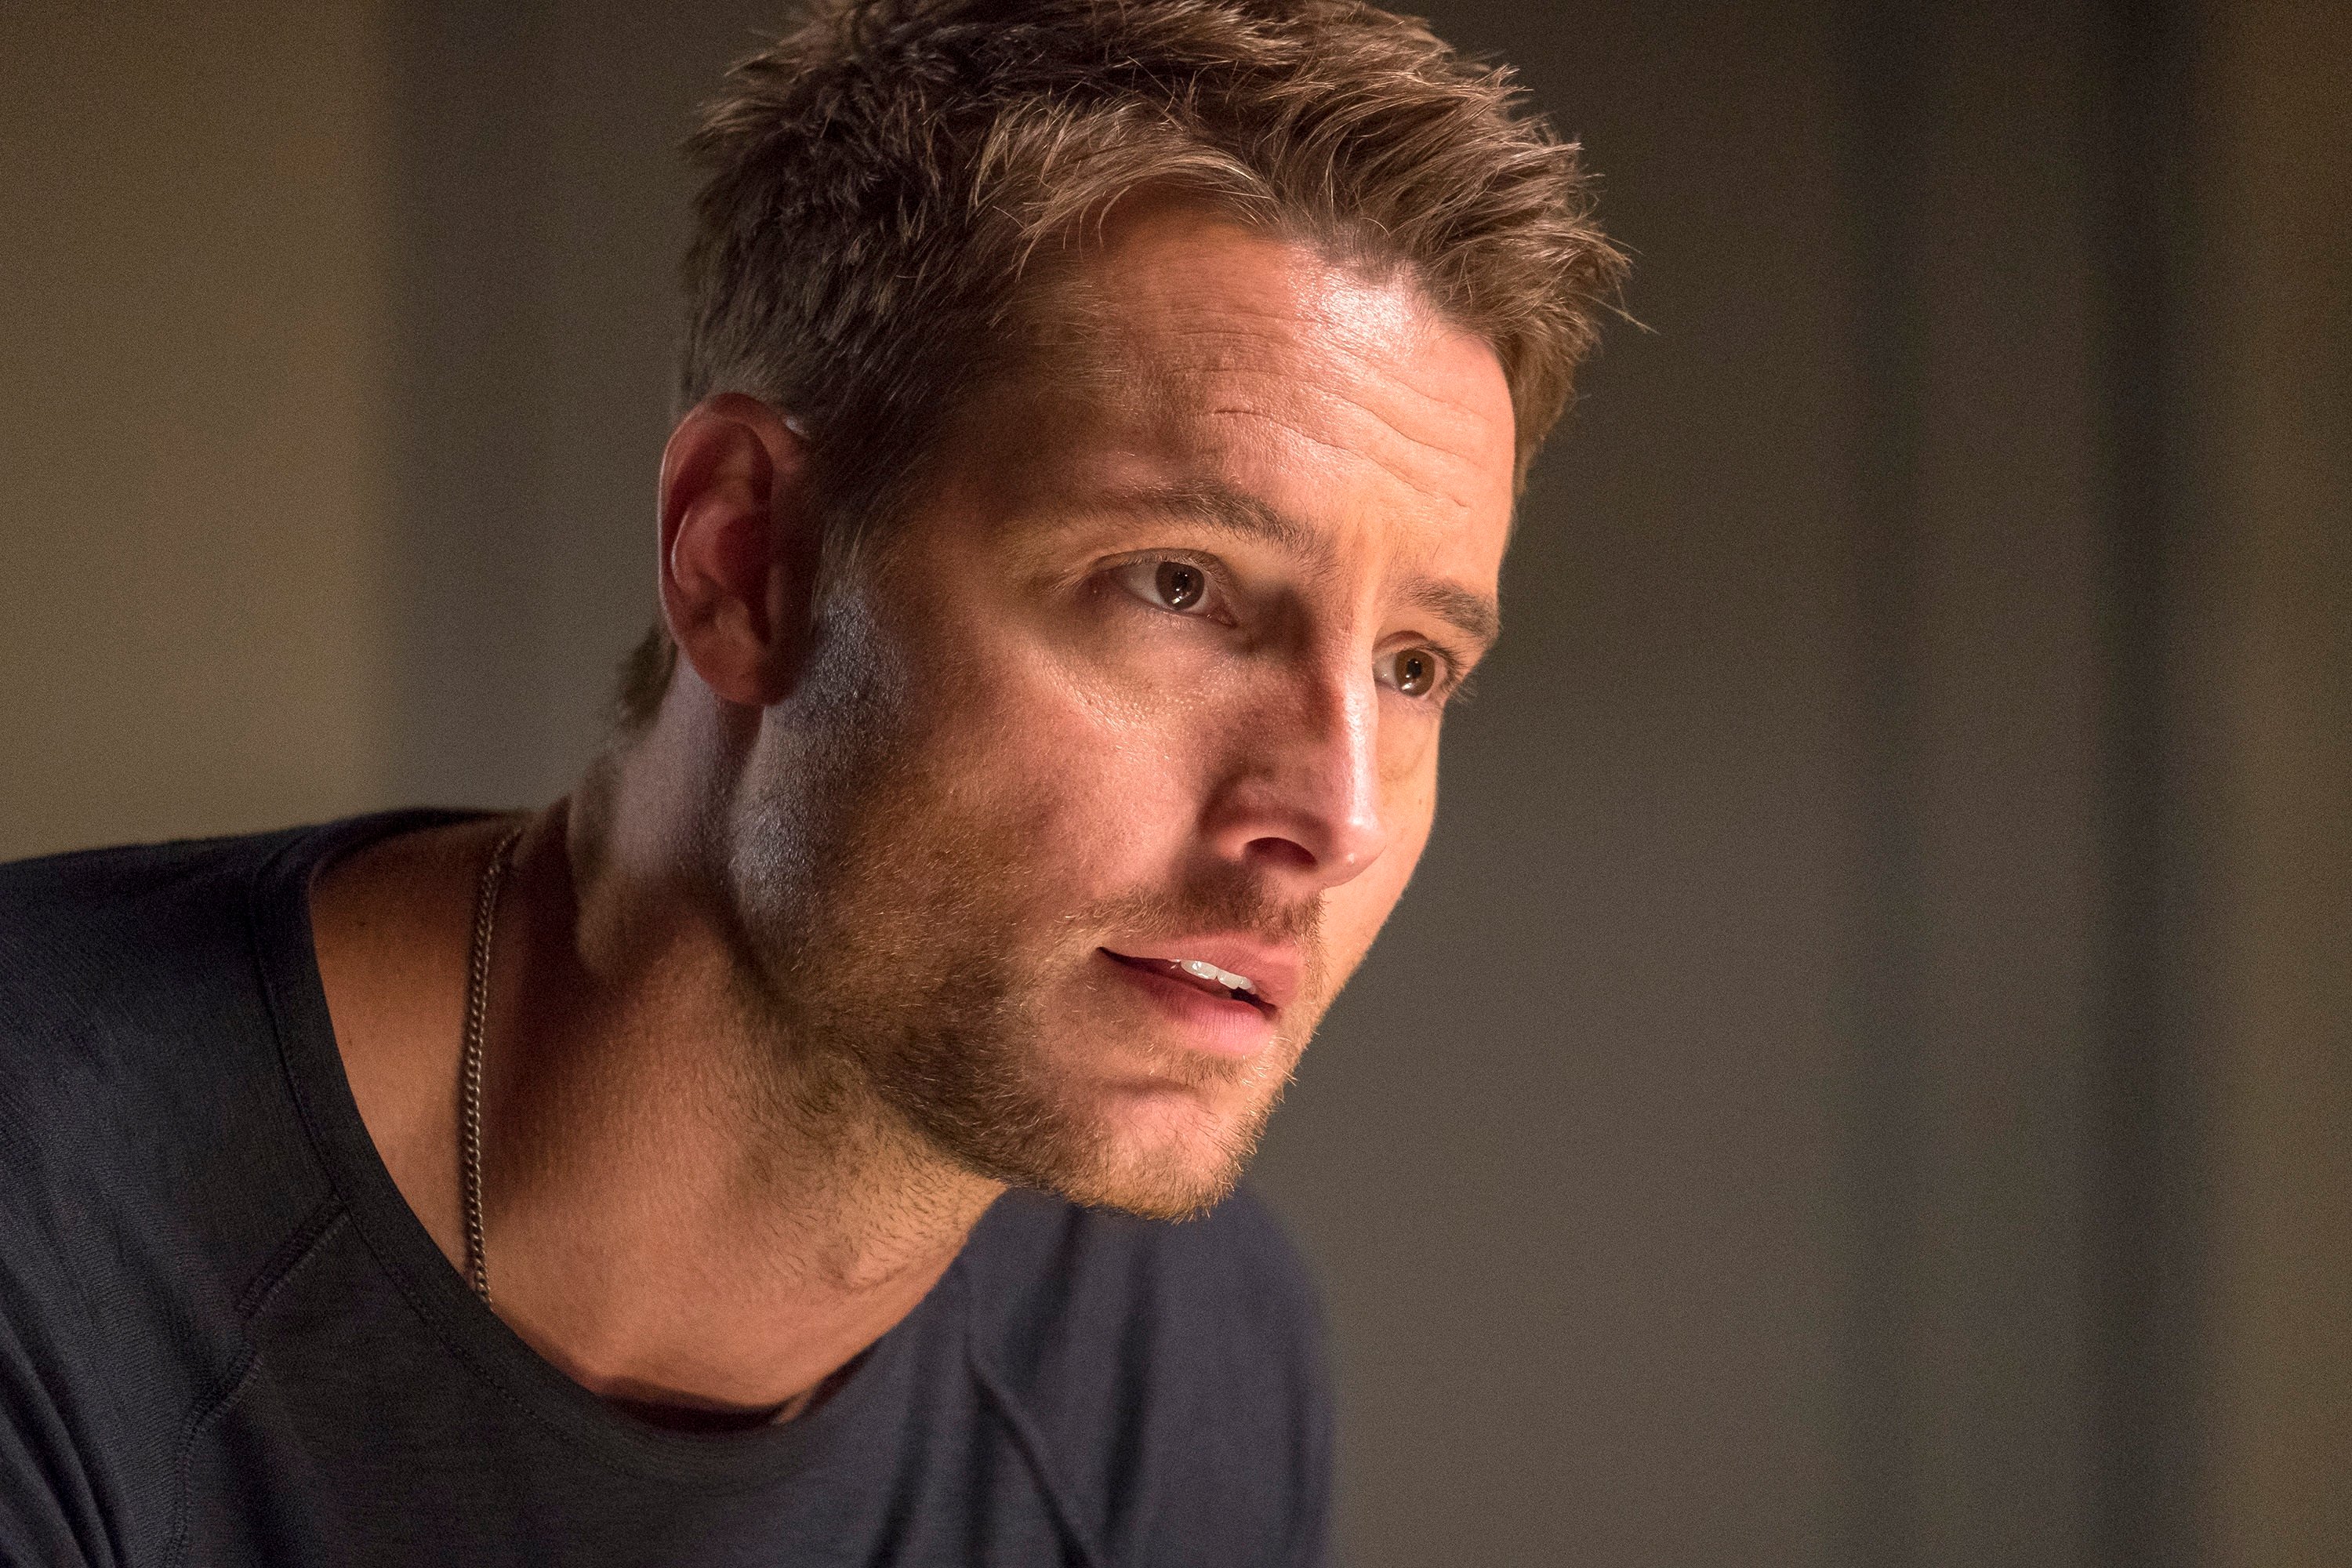 This Is Us next episode with Kevin Pearson (Justin Hartley)